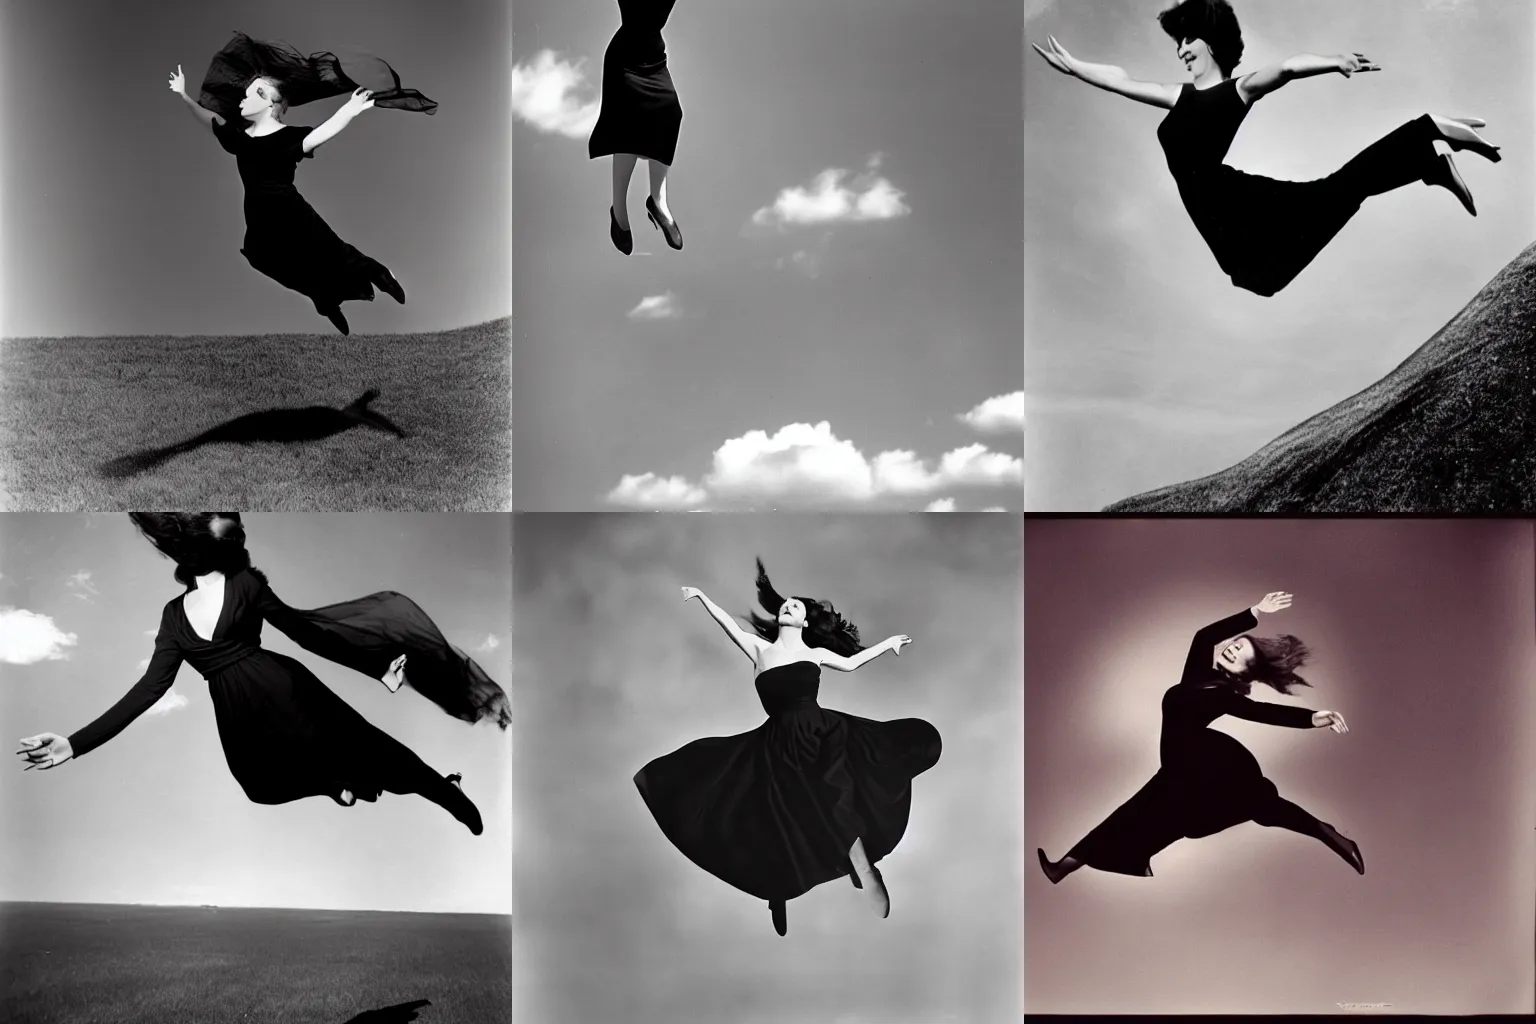 Prompt: a photgraph by philippe halsman of a woman wearing a black dress flying though the air